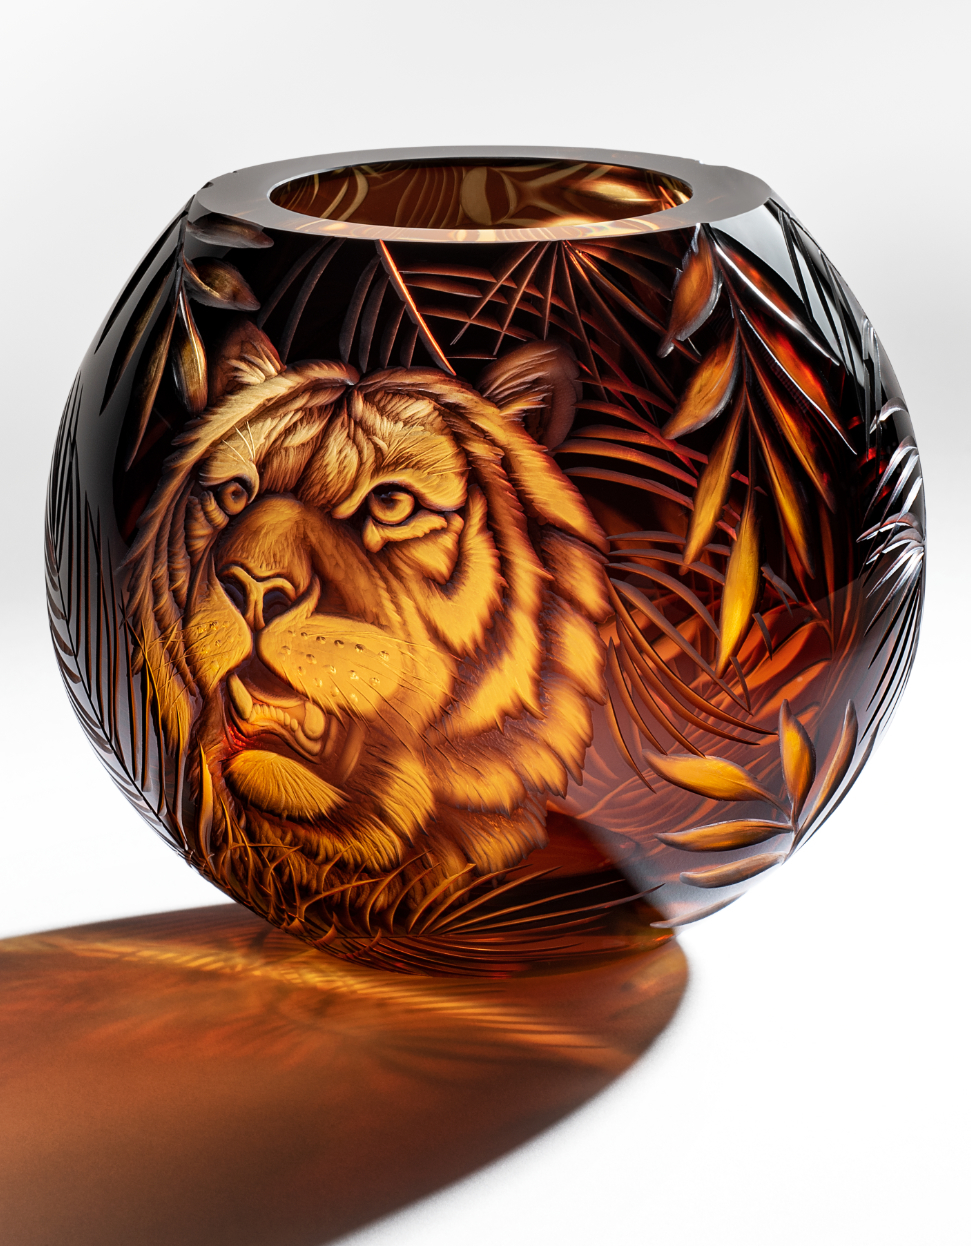 Beauty vase with tiger engraving, 13 cm - gallery #2